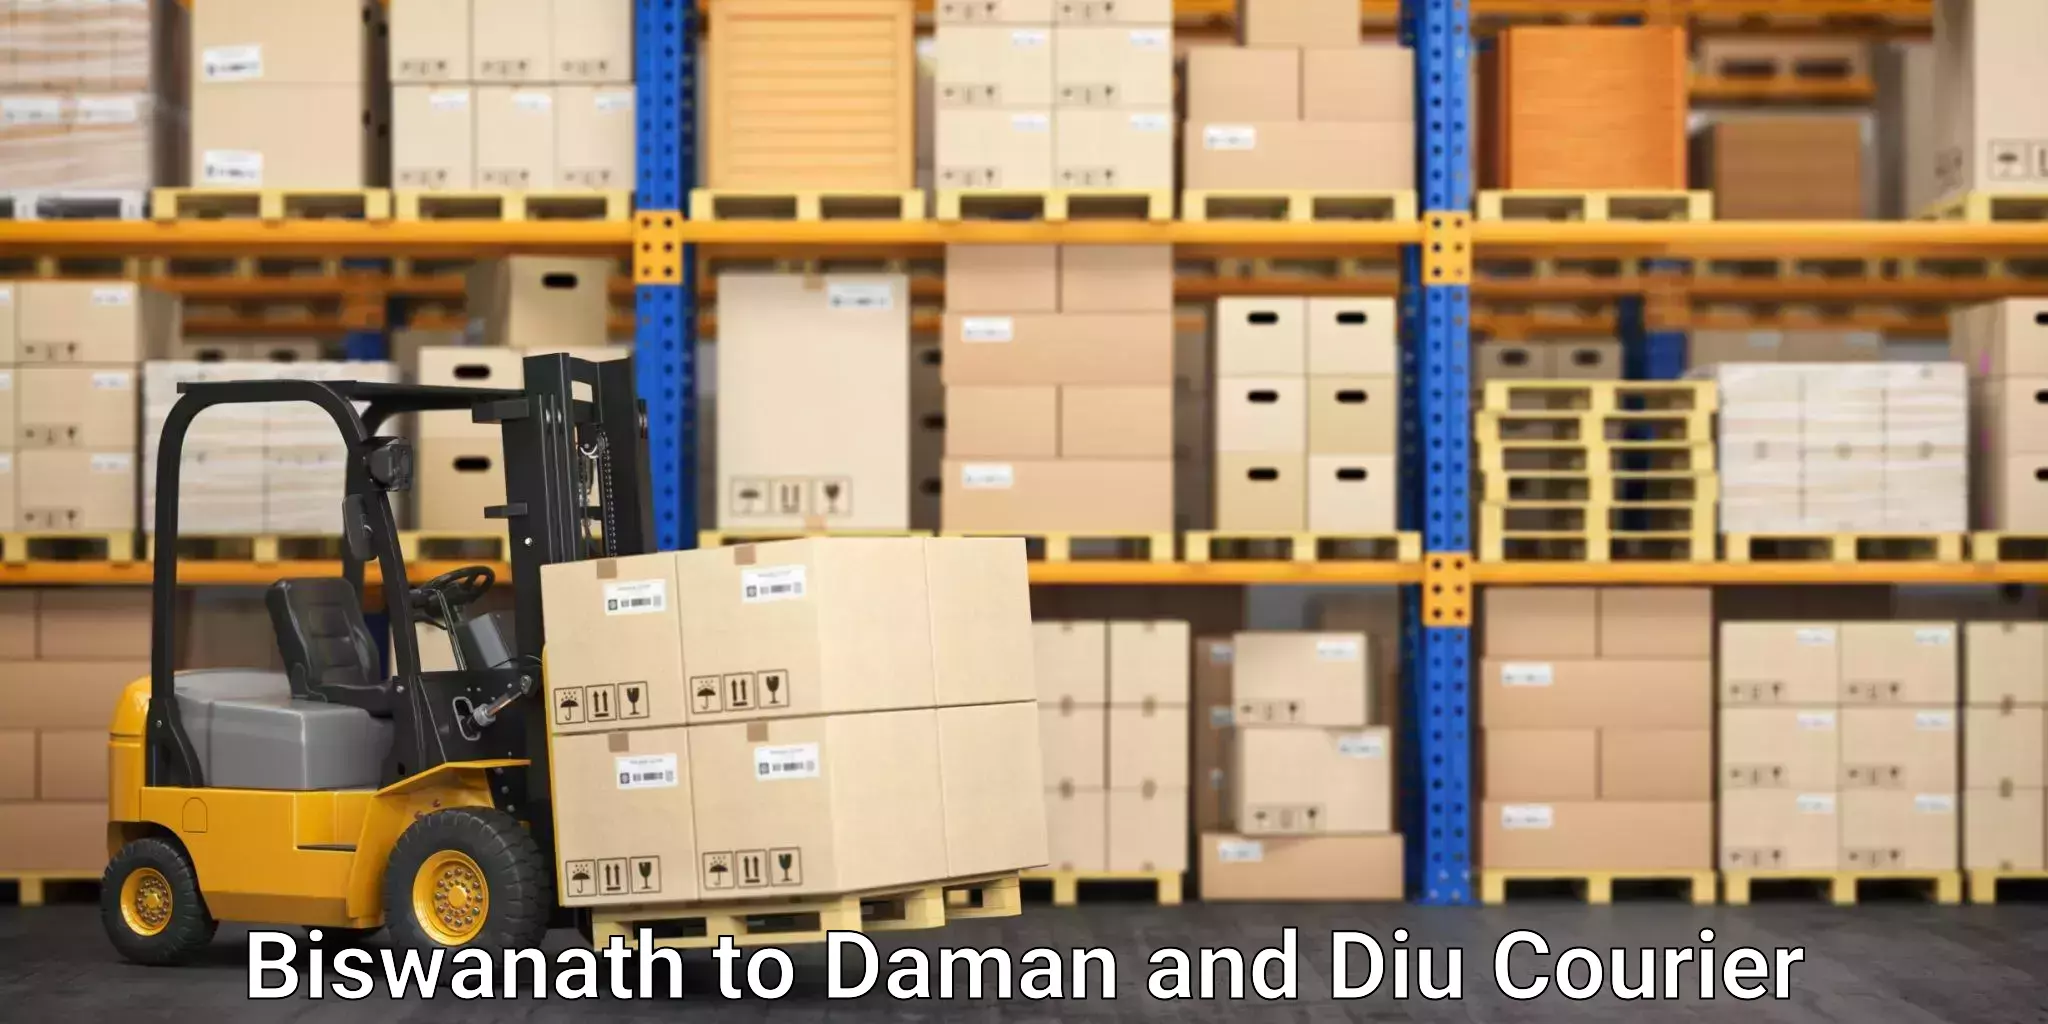 Expedited shipping methods in Biswanath to Daman and Diu